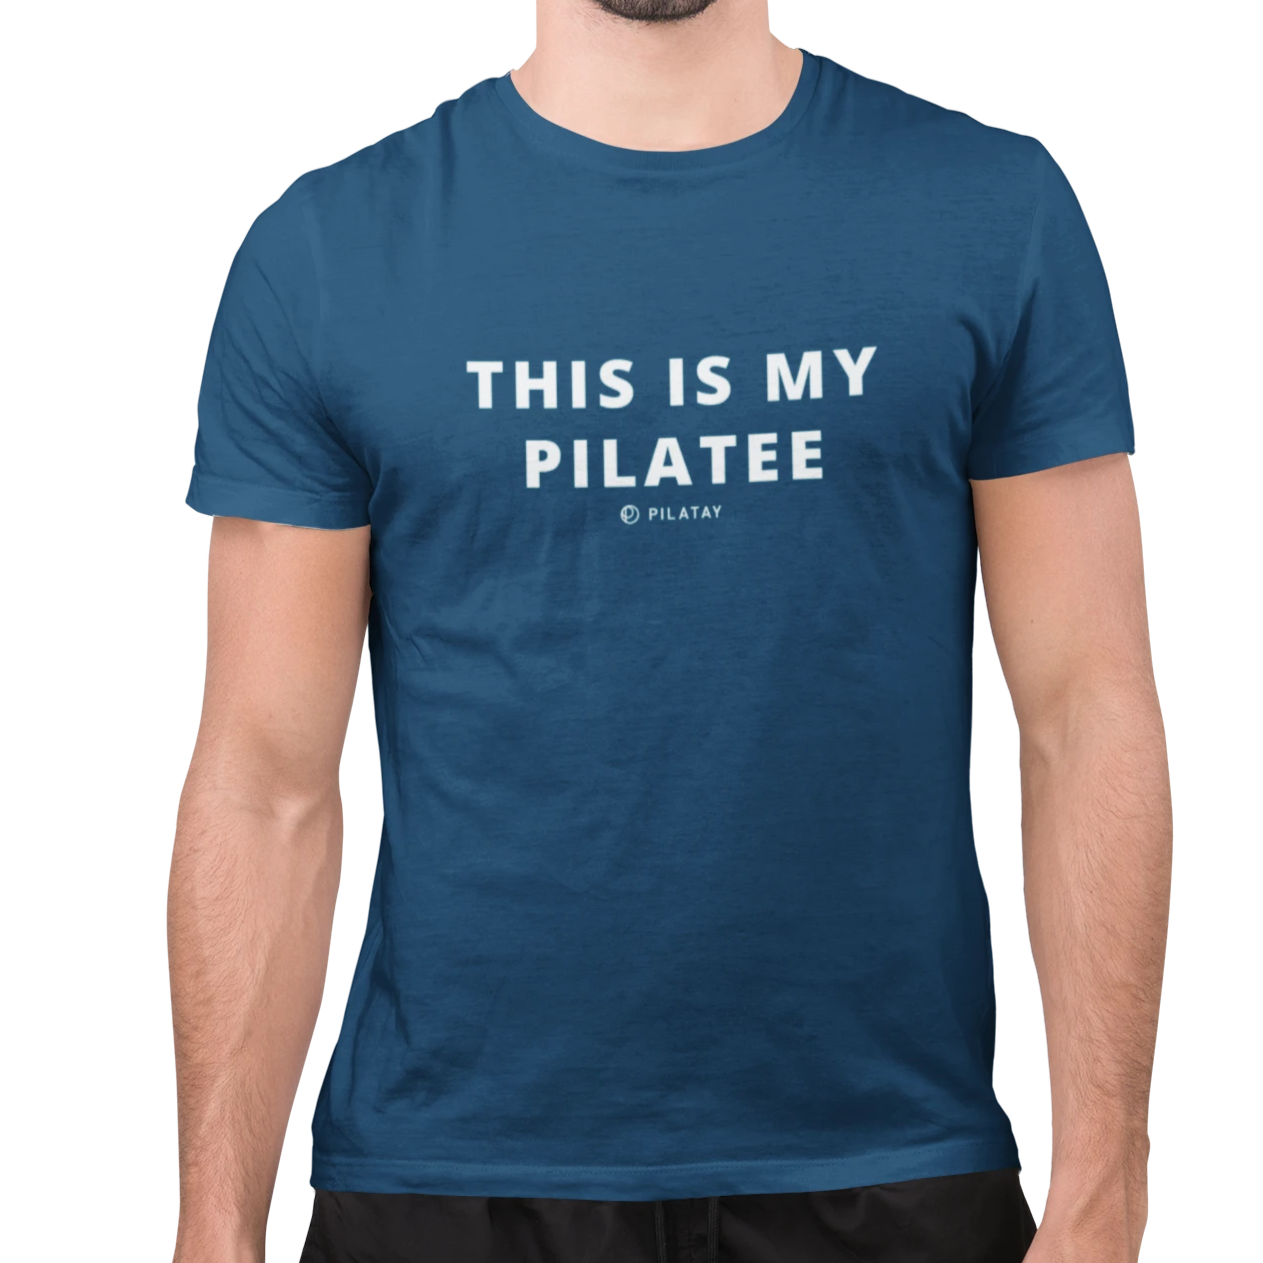 Pilates and yoga clothing for men